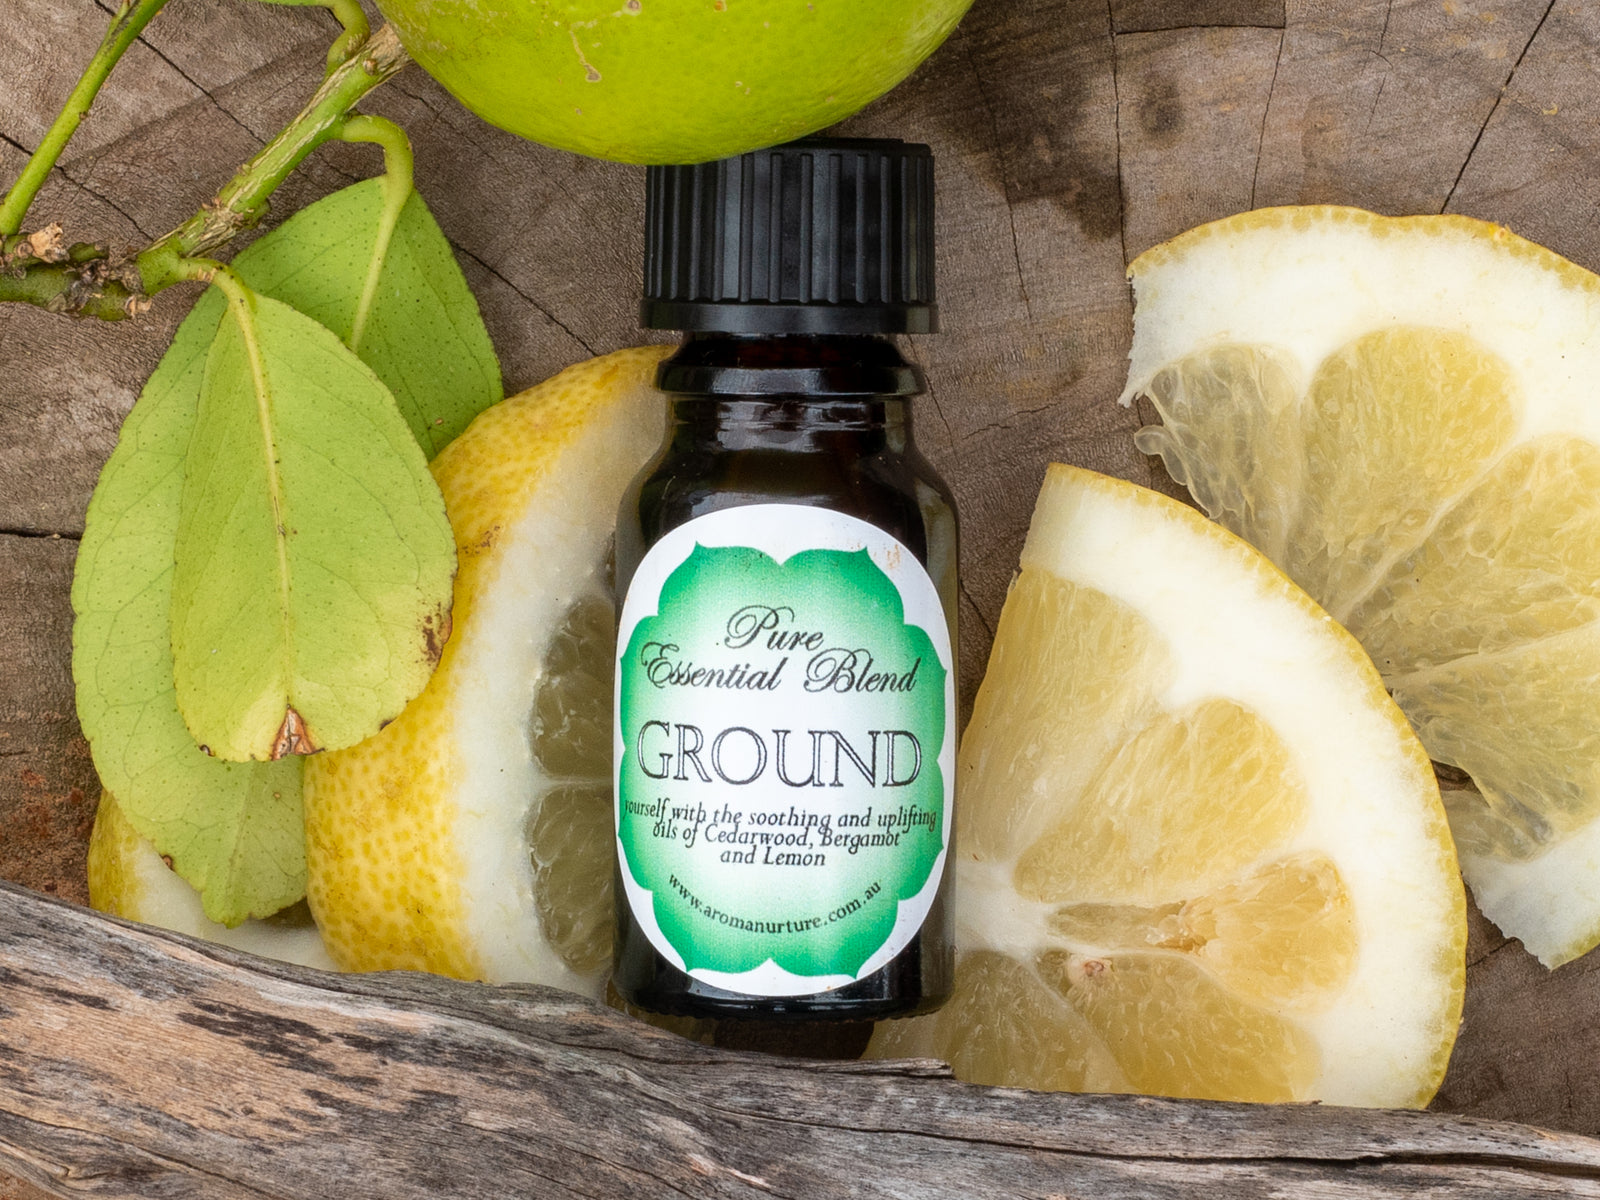 GROUND Pure essential oil blend